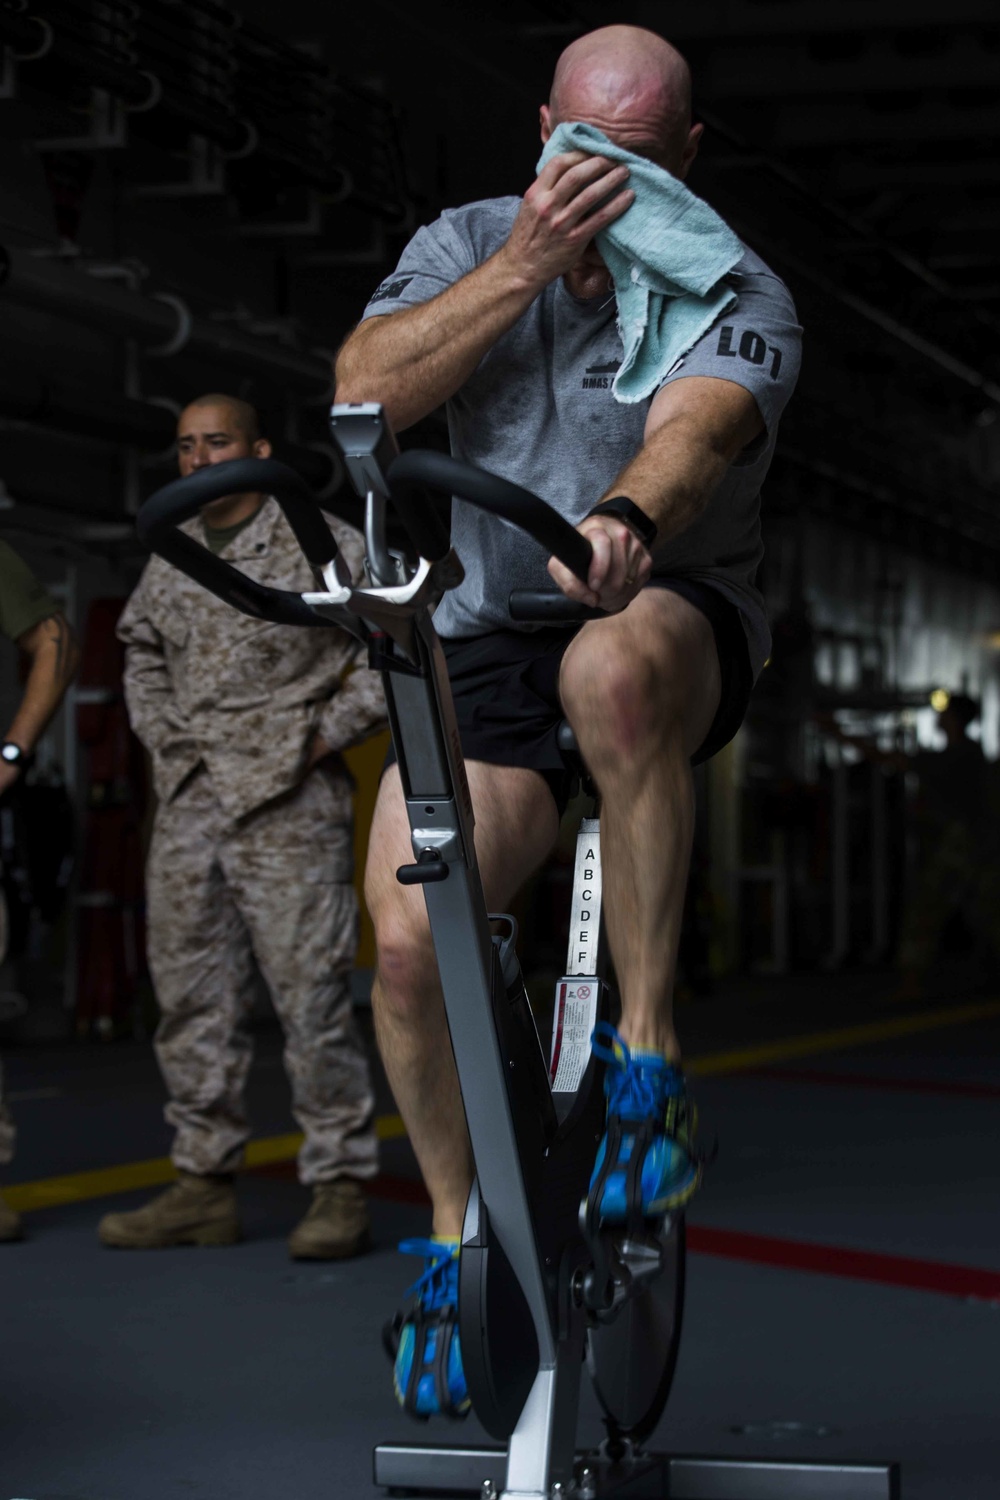 U.S. and Australian forces compete in cycling challenge aboard HMAS Adelaide